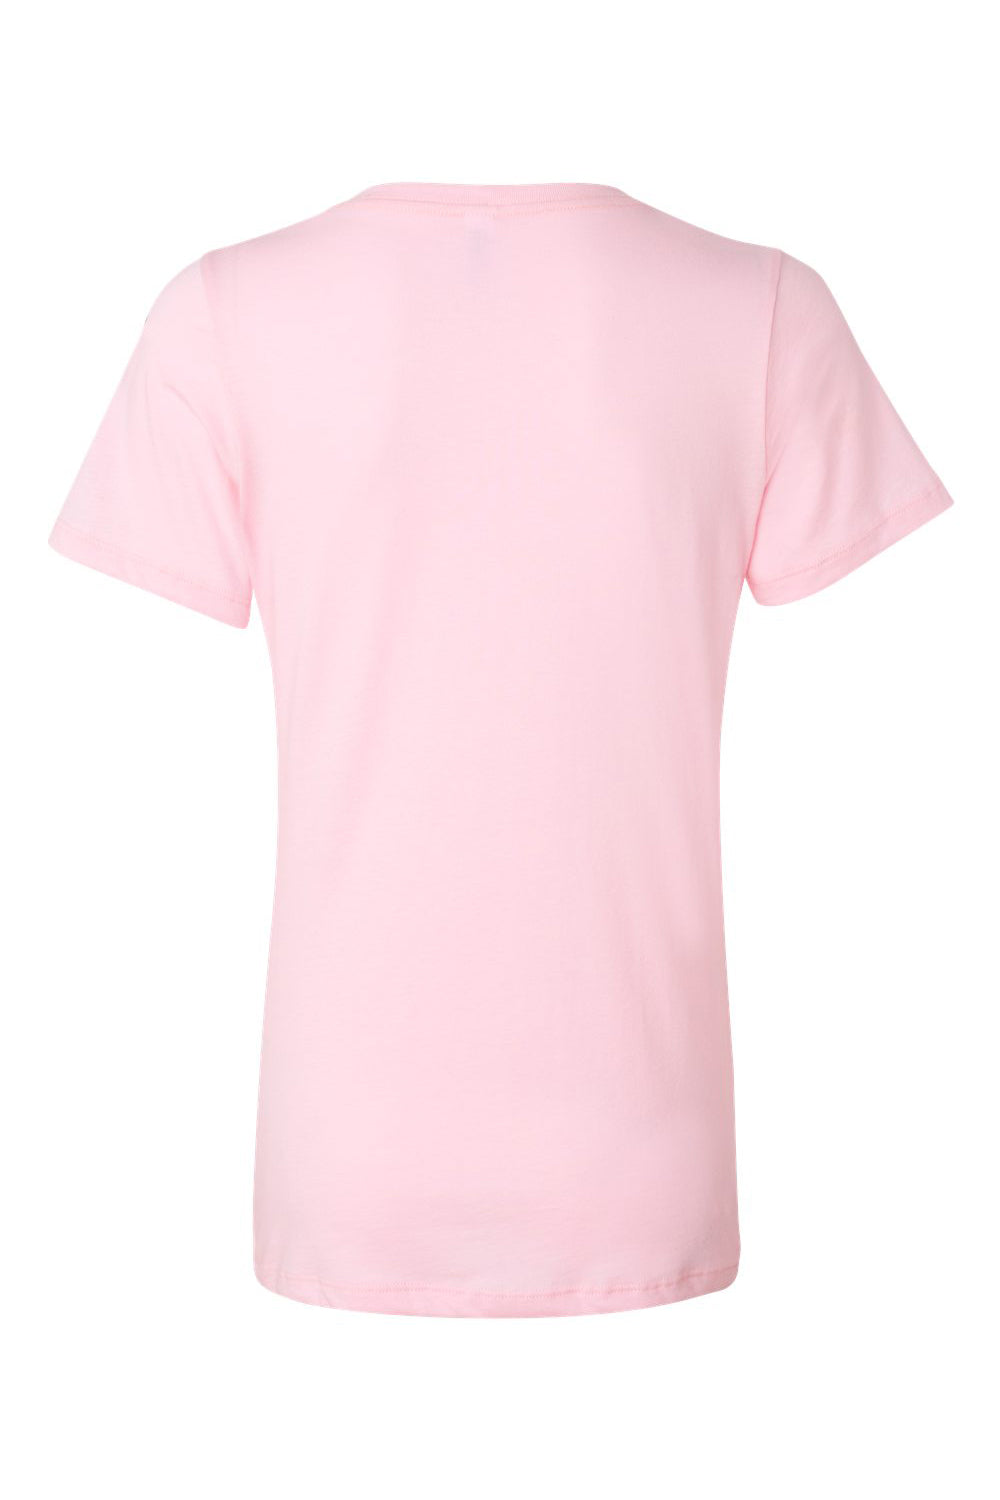 Bella + Canvas BC6405/6405 Womens Relaxed Jersey Short Sleeve V-Neck T-Shirt Pink Flat Back